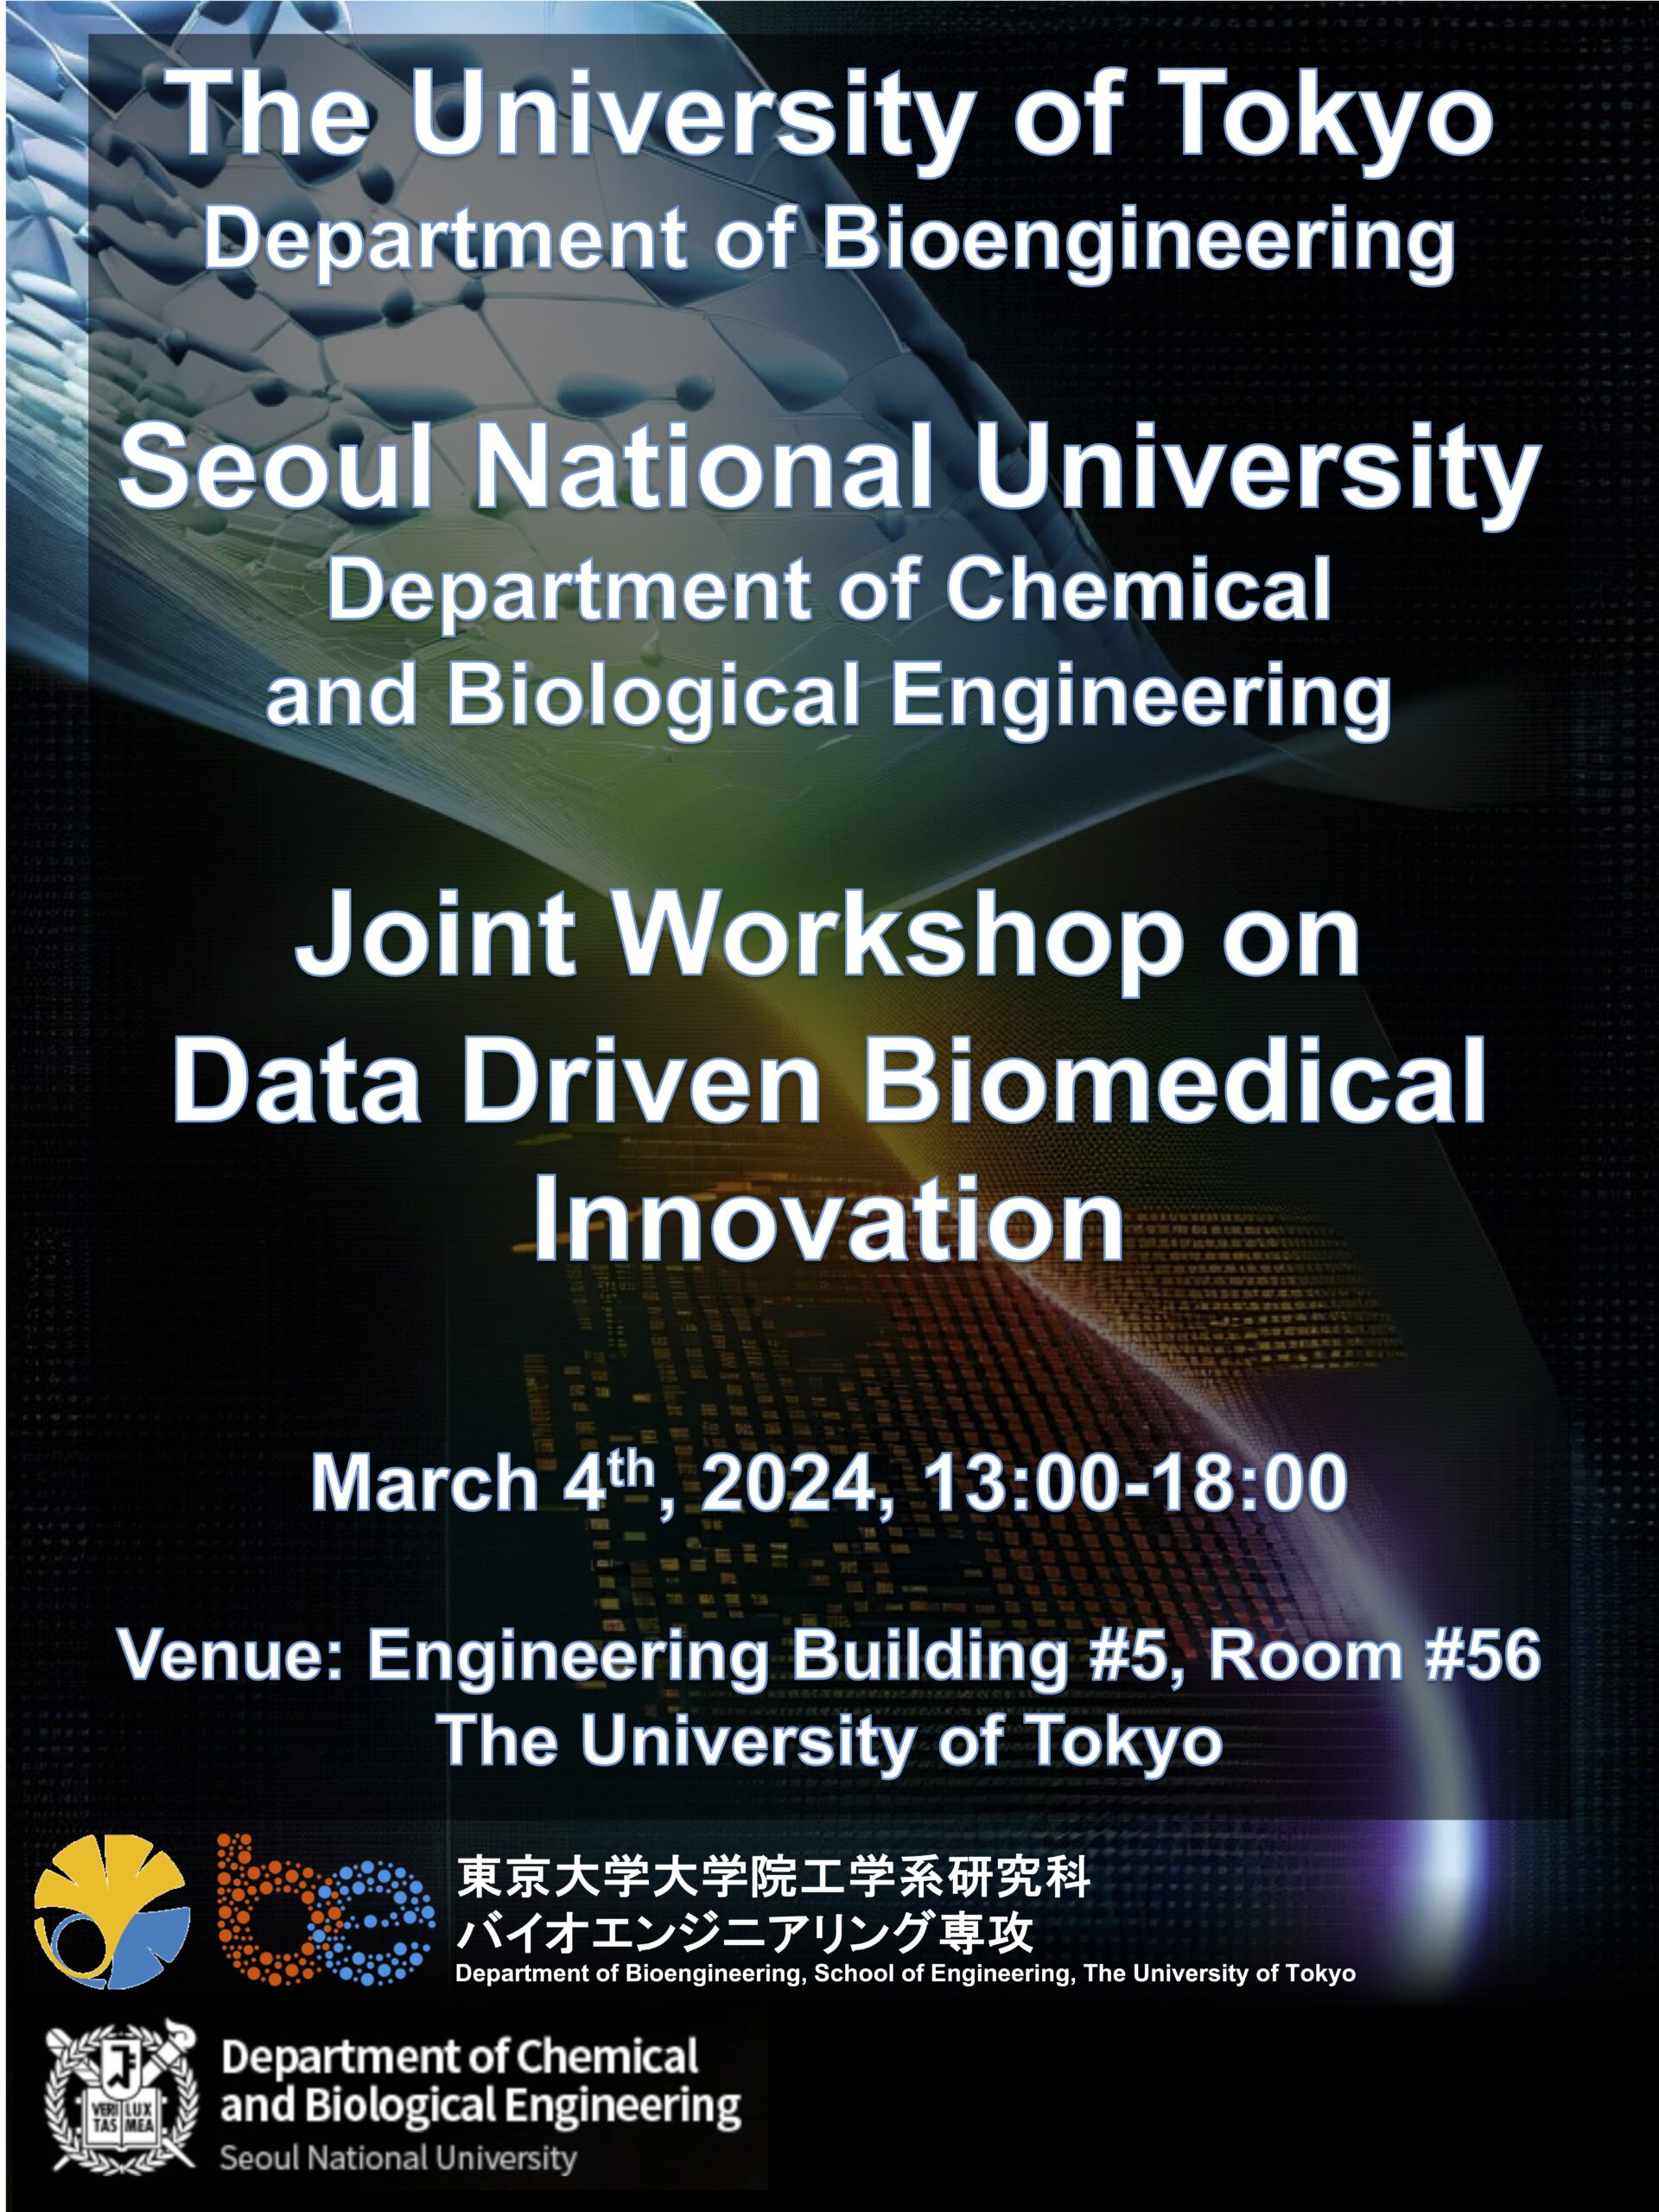 Workshop with Seoul National University on ‘Data-Driven Biomedical Innovation’